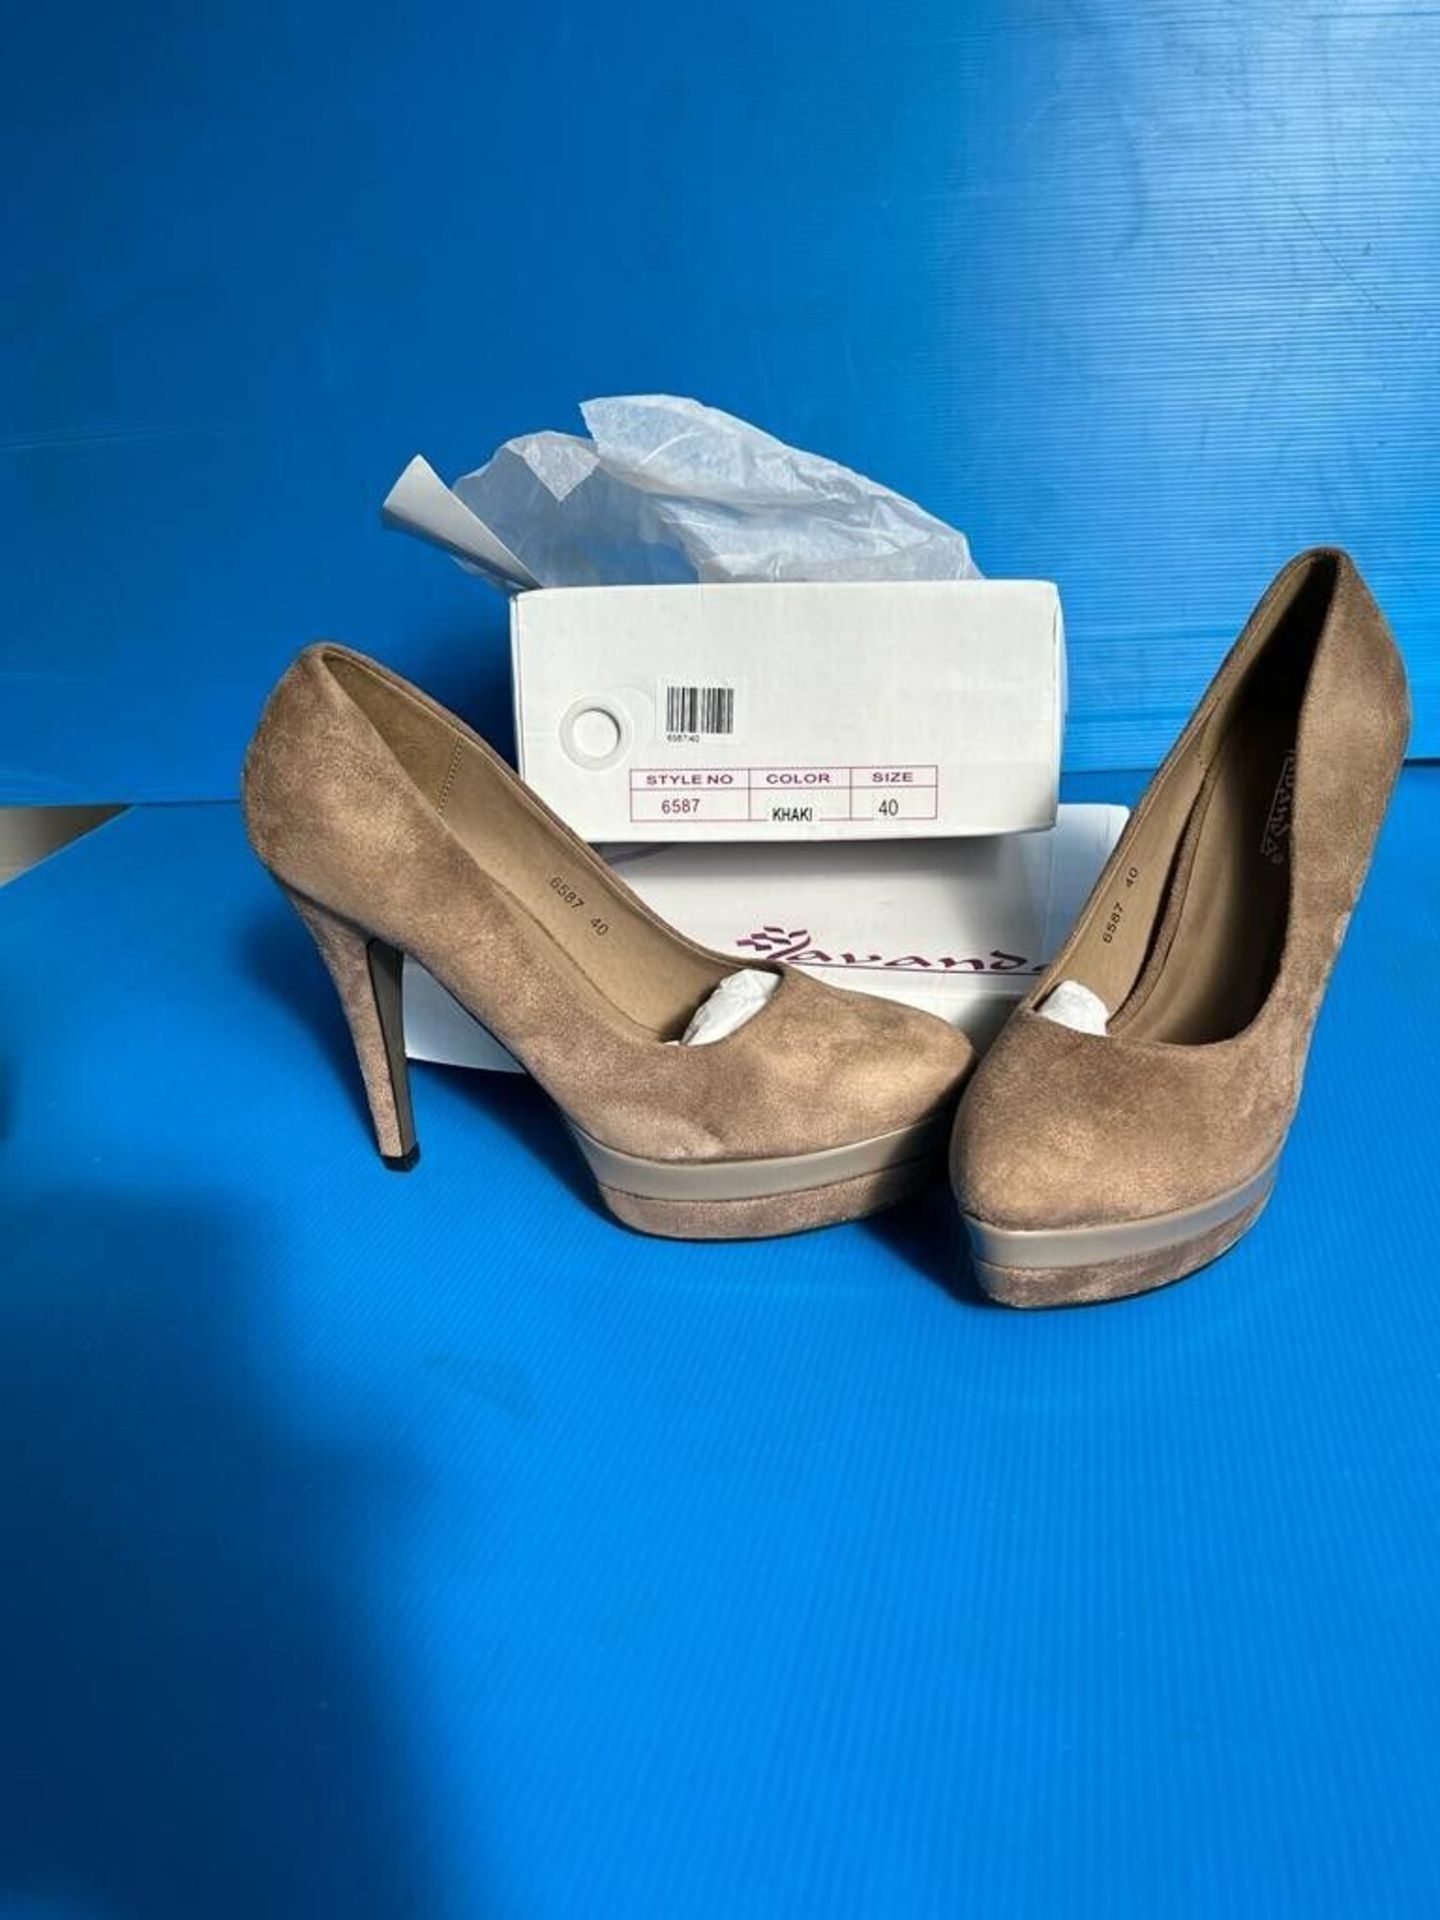 X100 BRAND NEW PAIRS WOMENS HIGH HEELS - MIXED STYLES AND SIZES RRP £3000 - Image 12 of 14